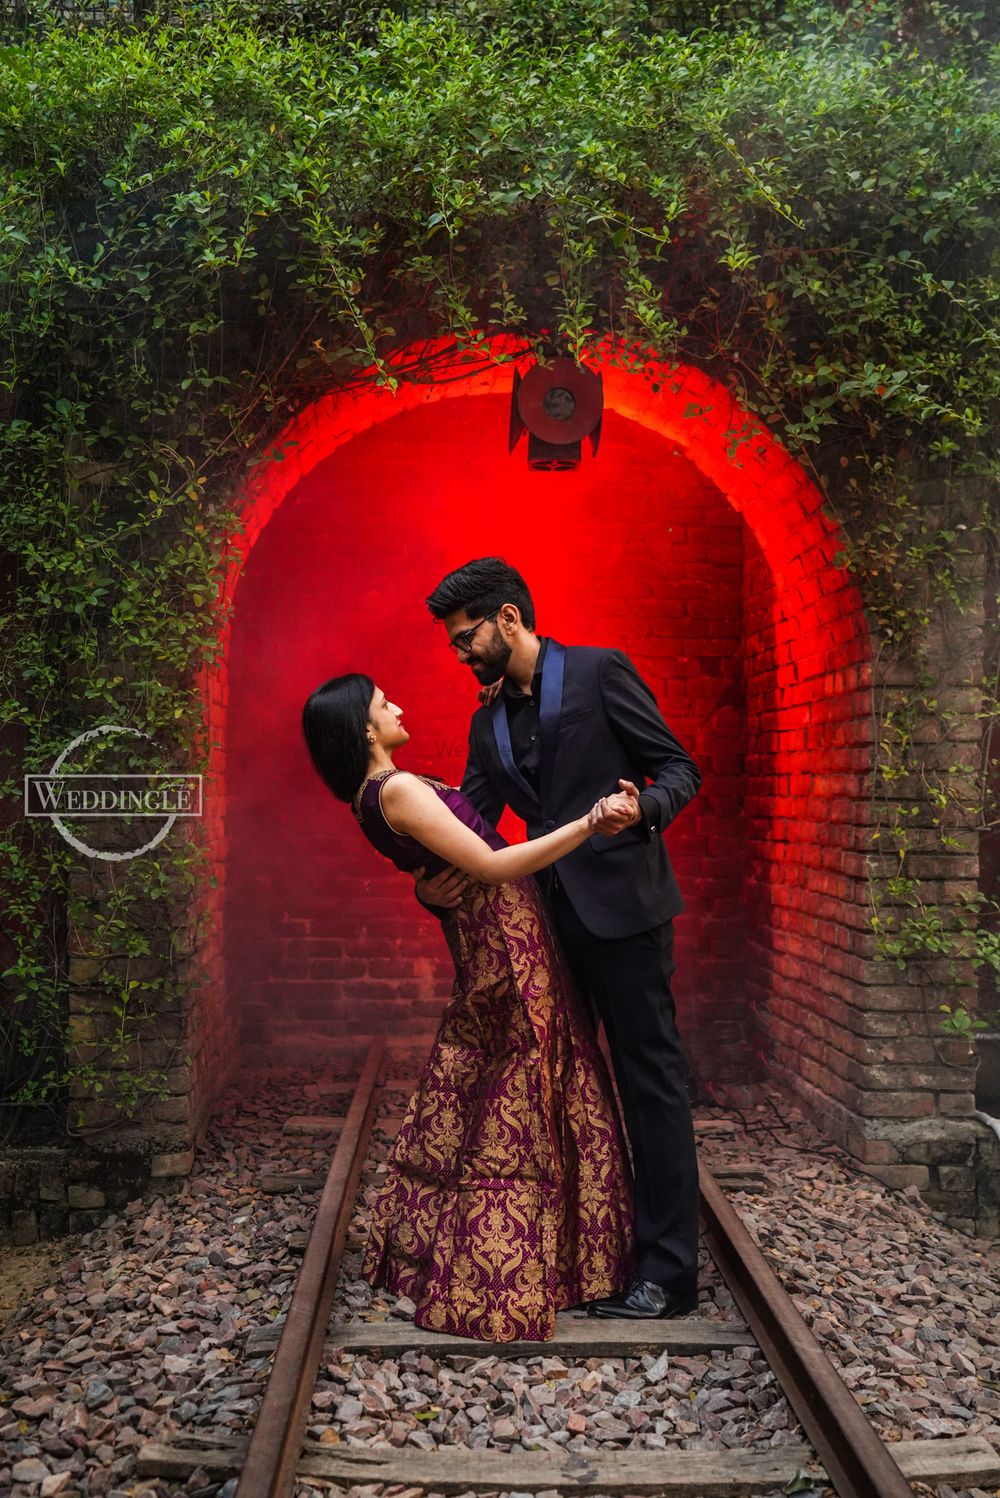 Photo From Prewedding photography - By Weddingle Productions